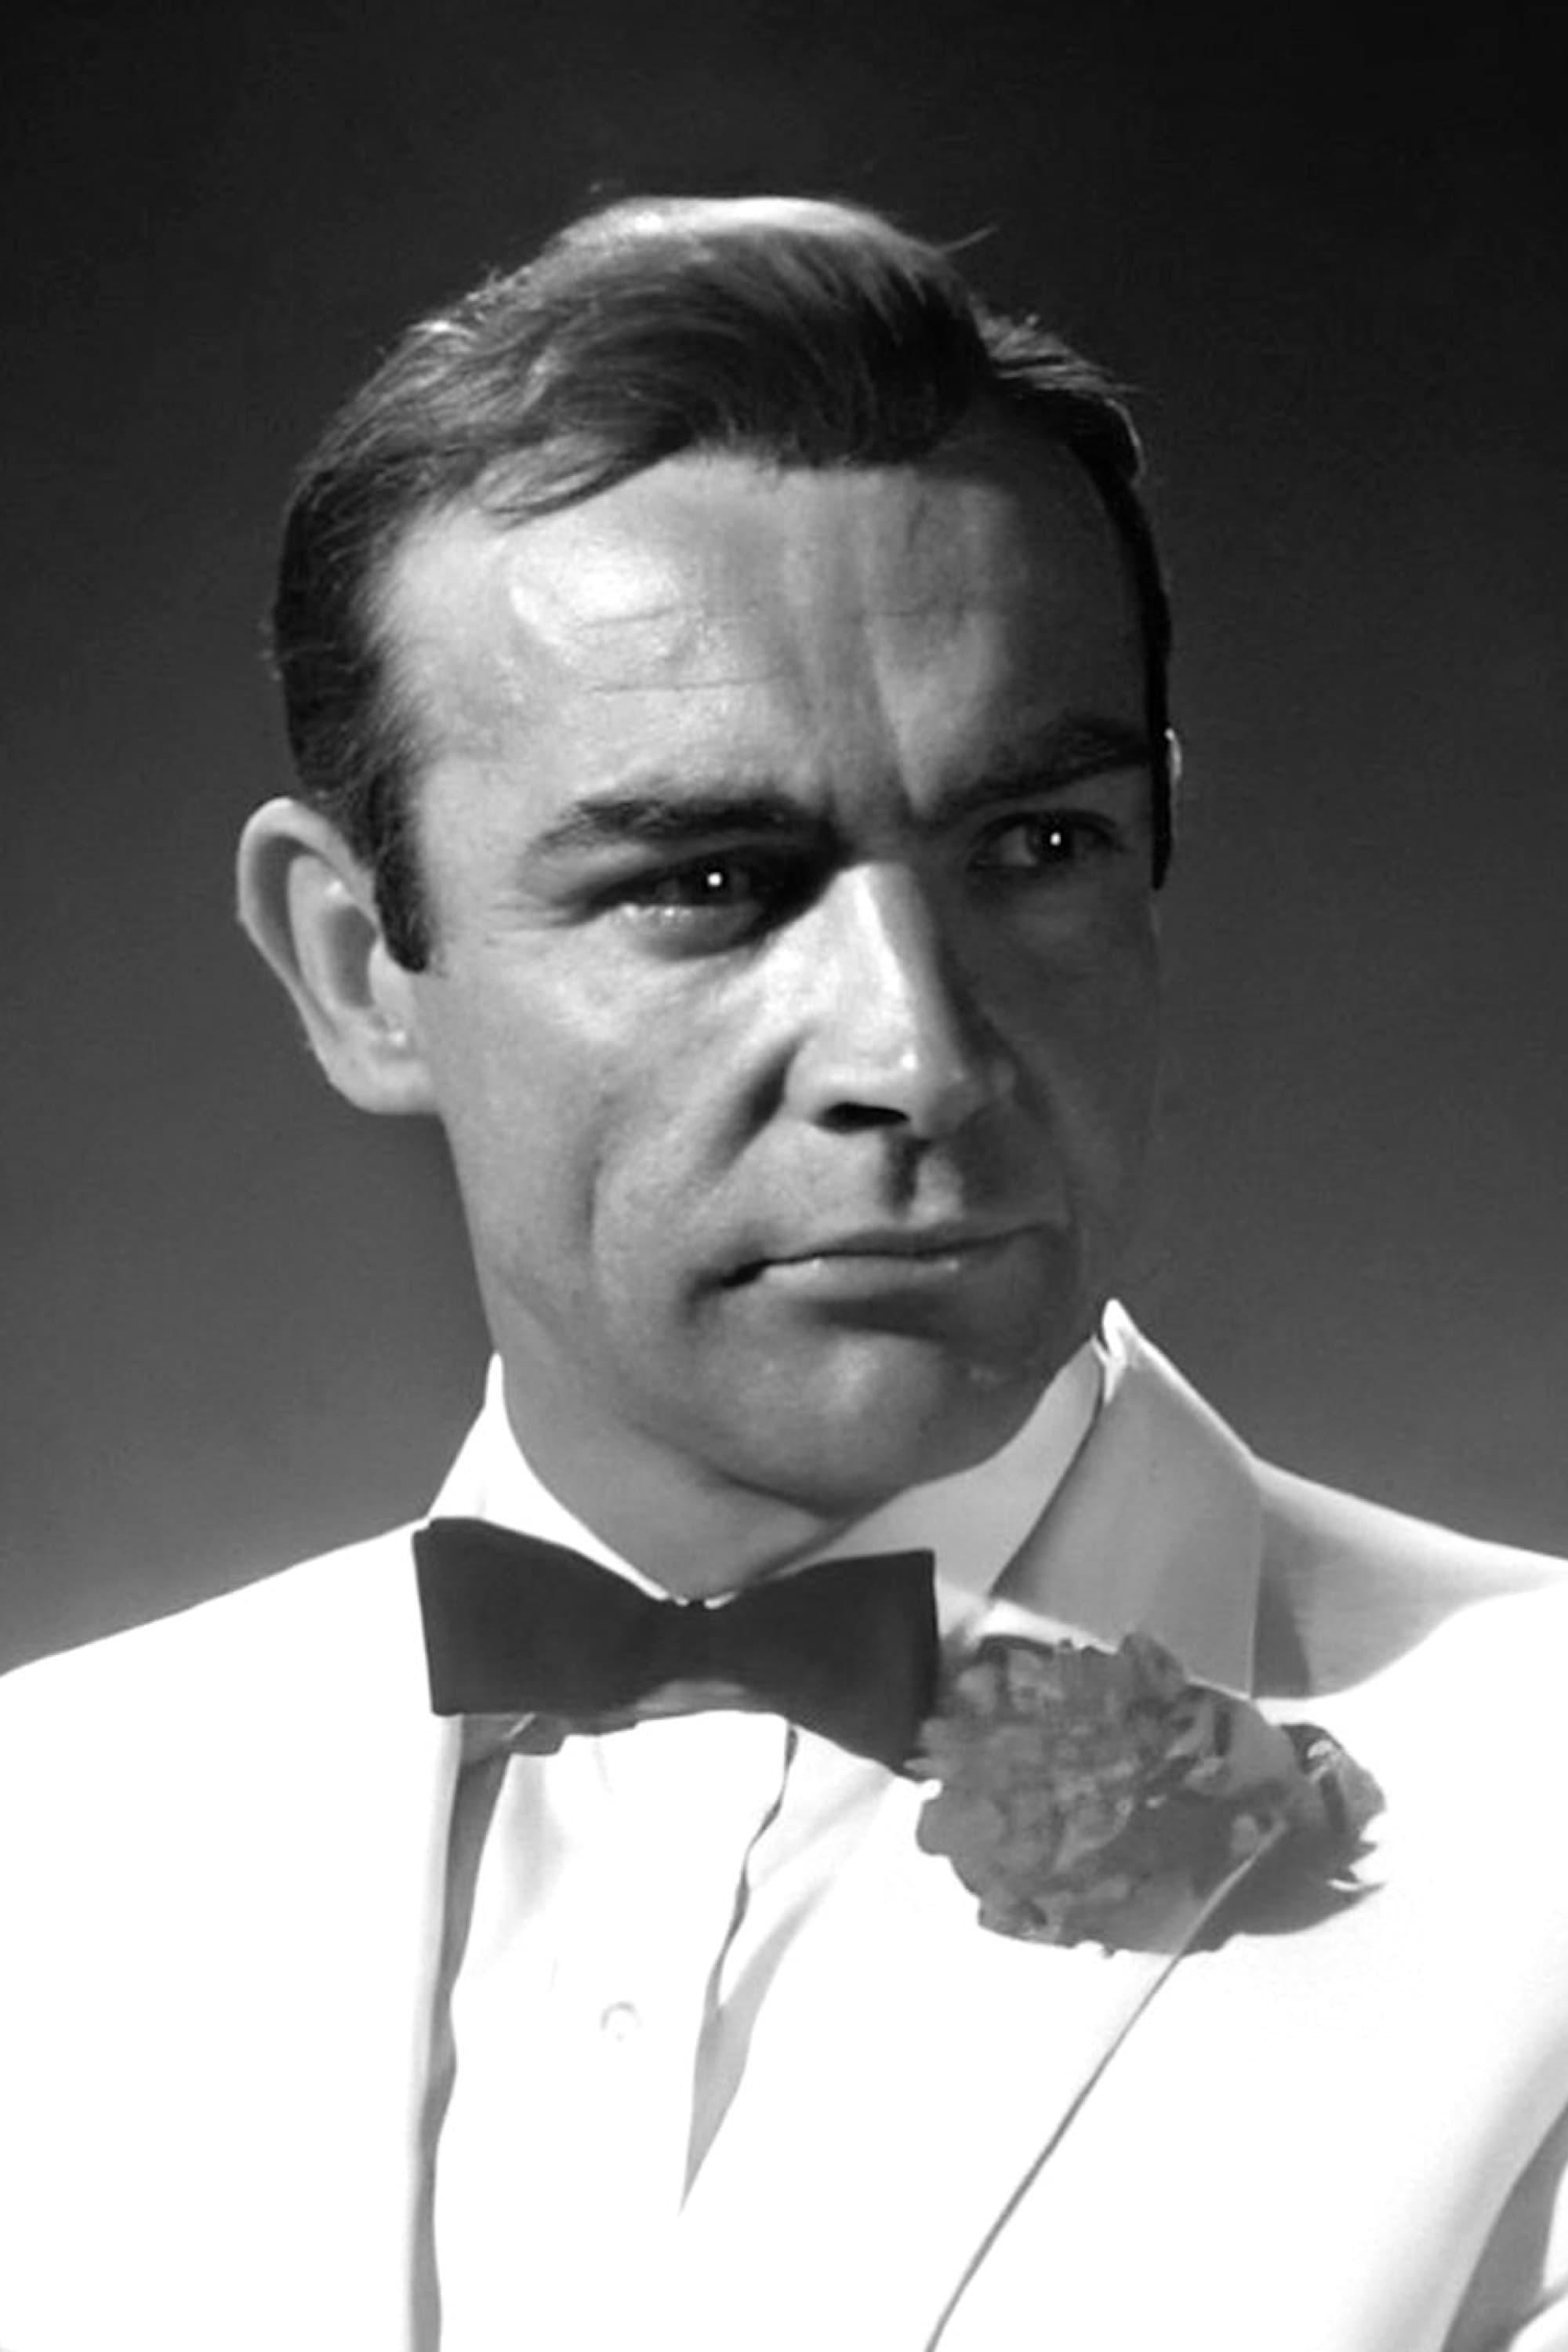 Sean Connery | William of Baskerville